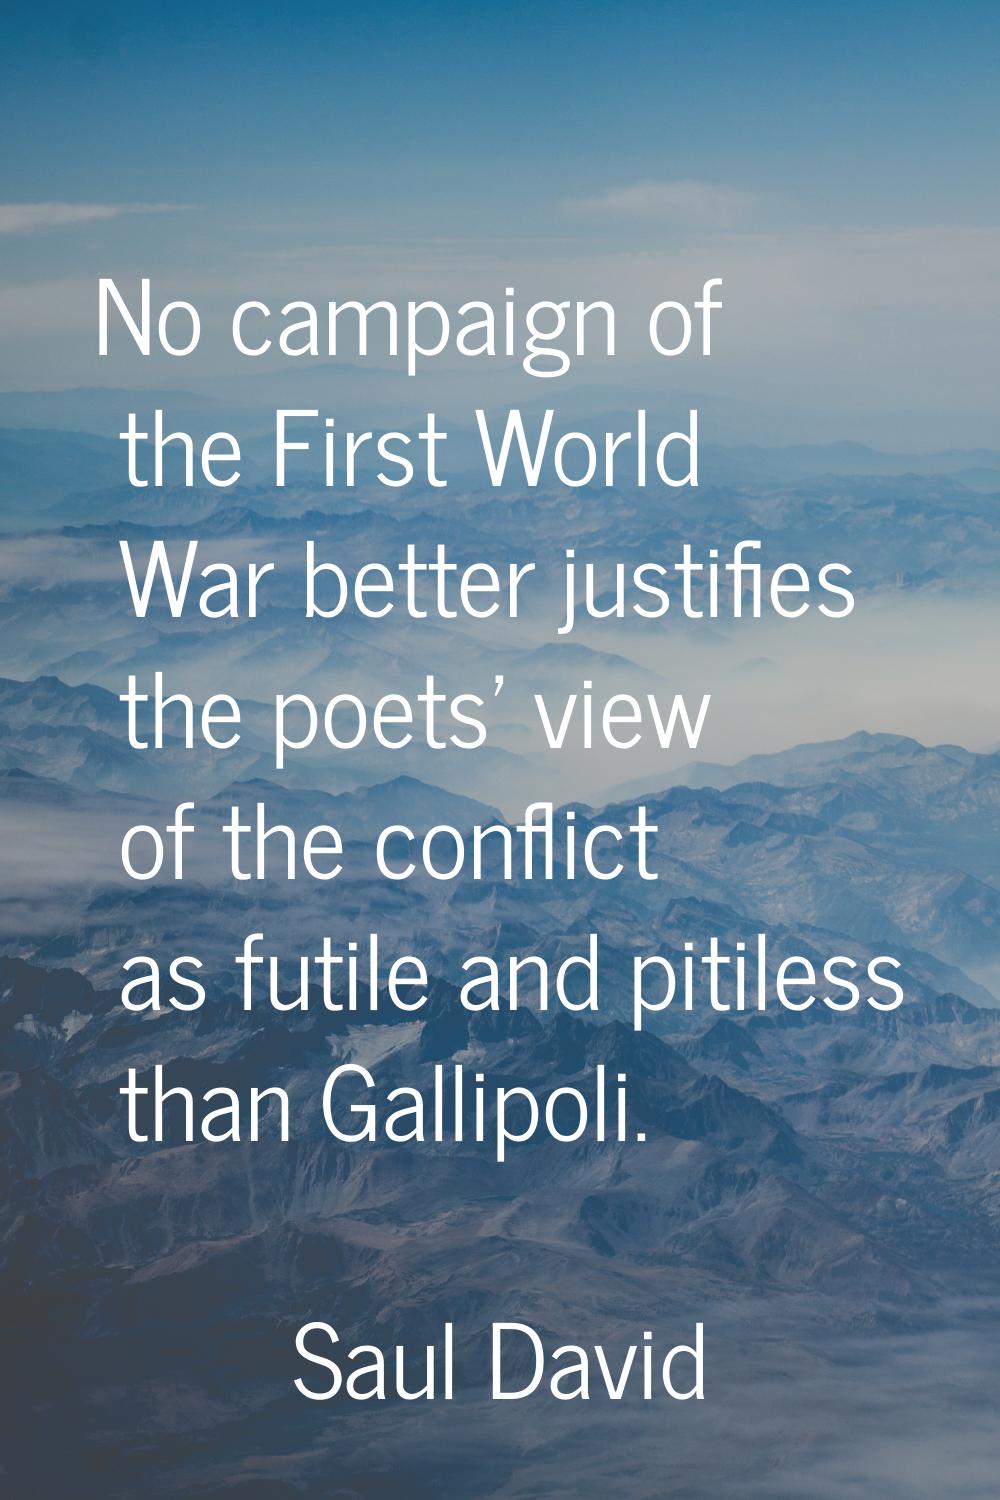 No campaign of the First World War better justifies the poets' view of the conflict as futile and p